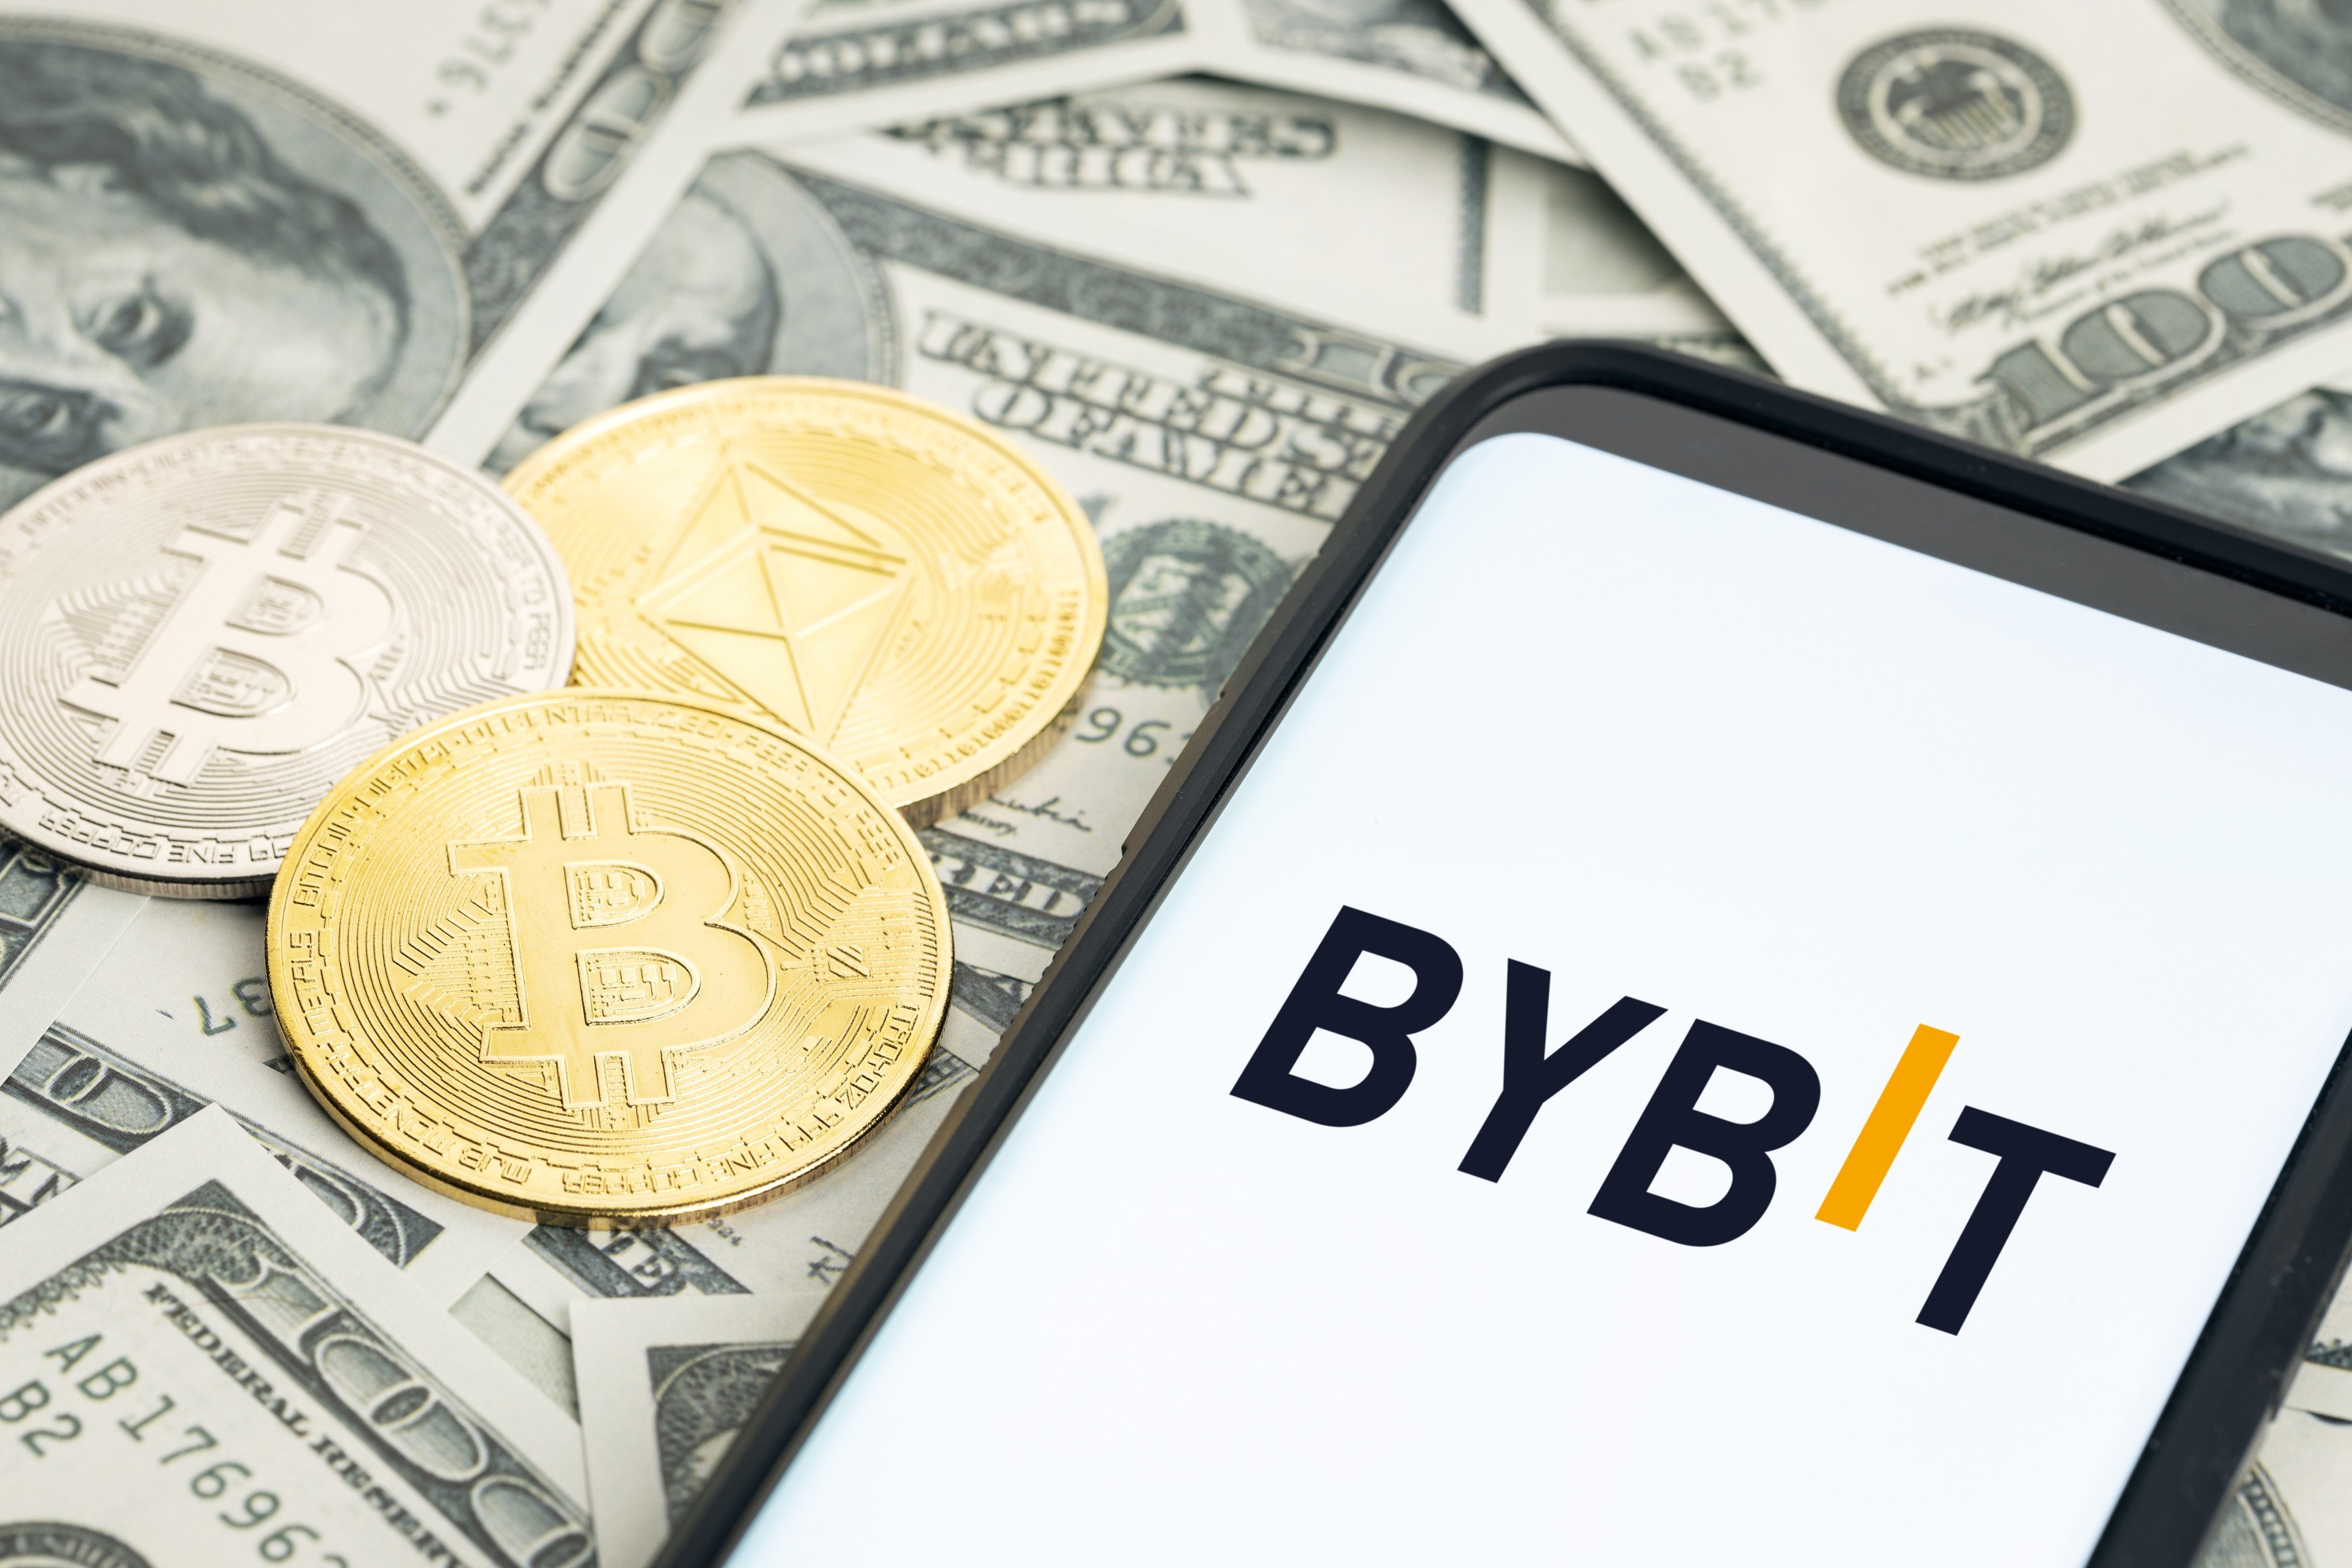 Bybit is currently the world’s second-largest crypto exchange by trading volume. Photo: Shutterstock